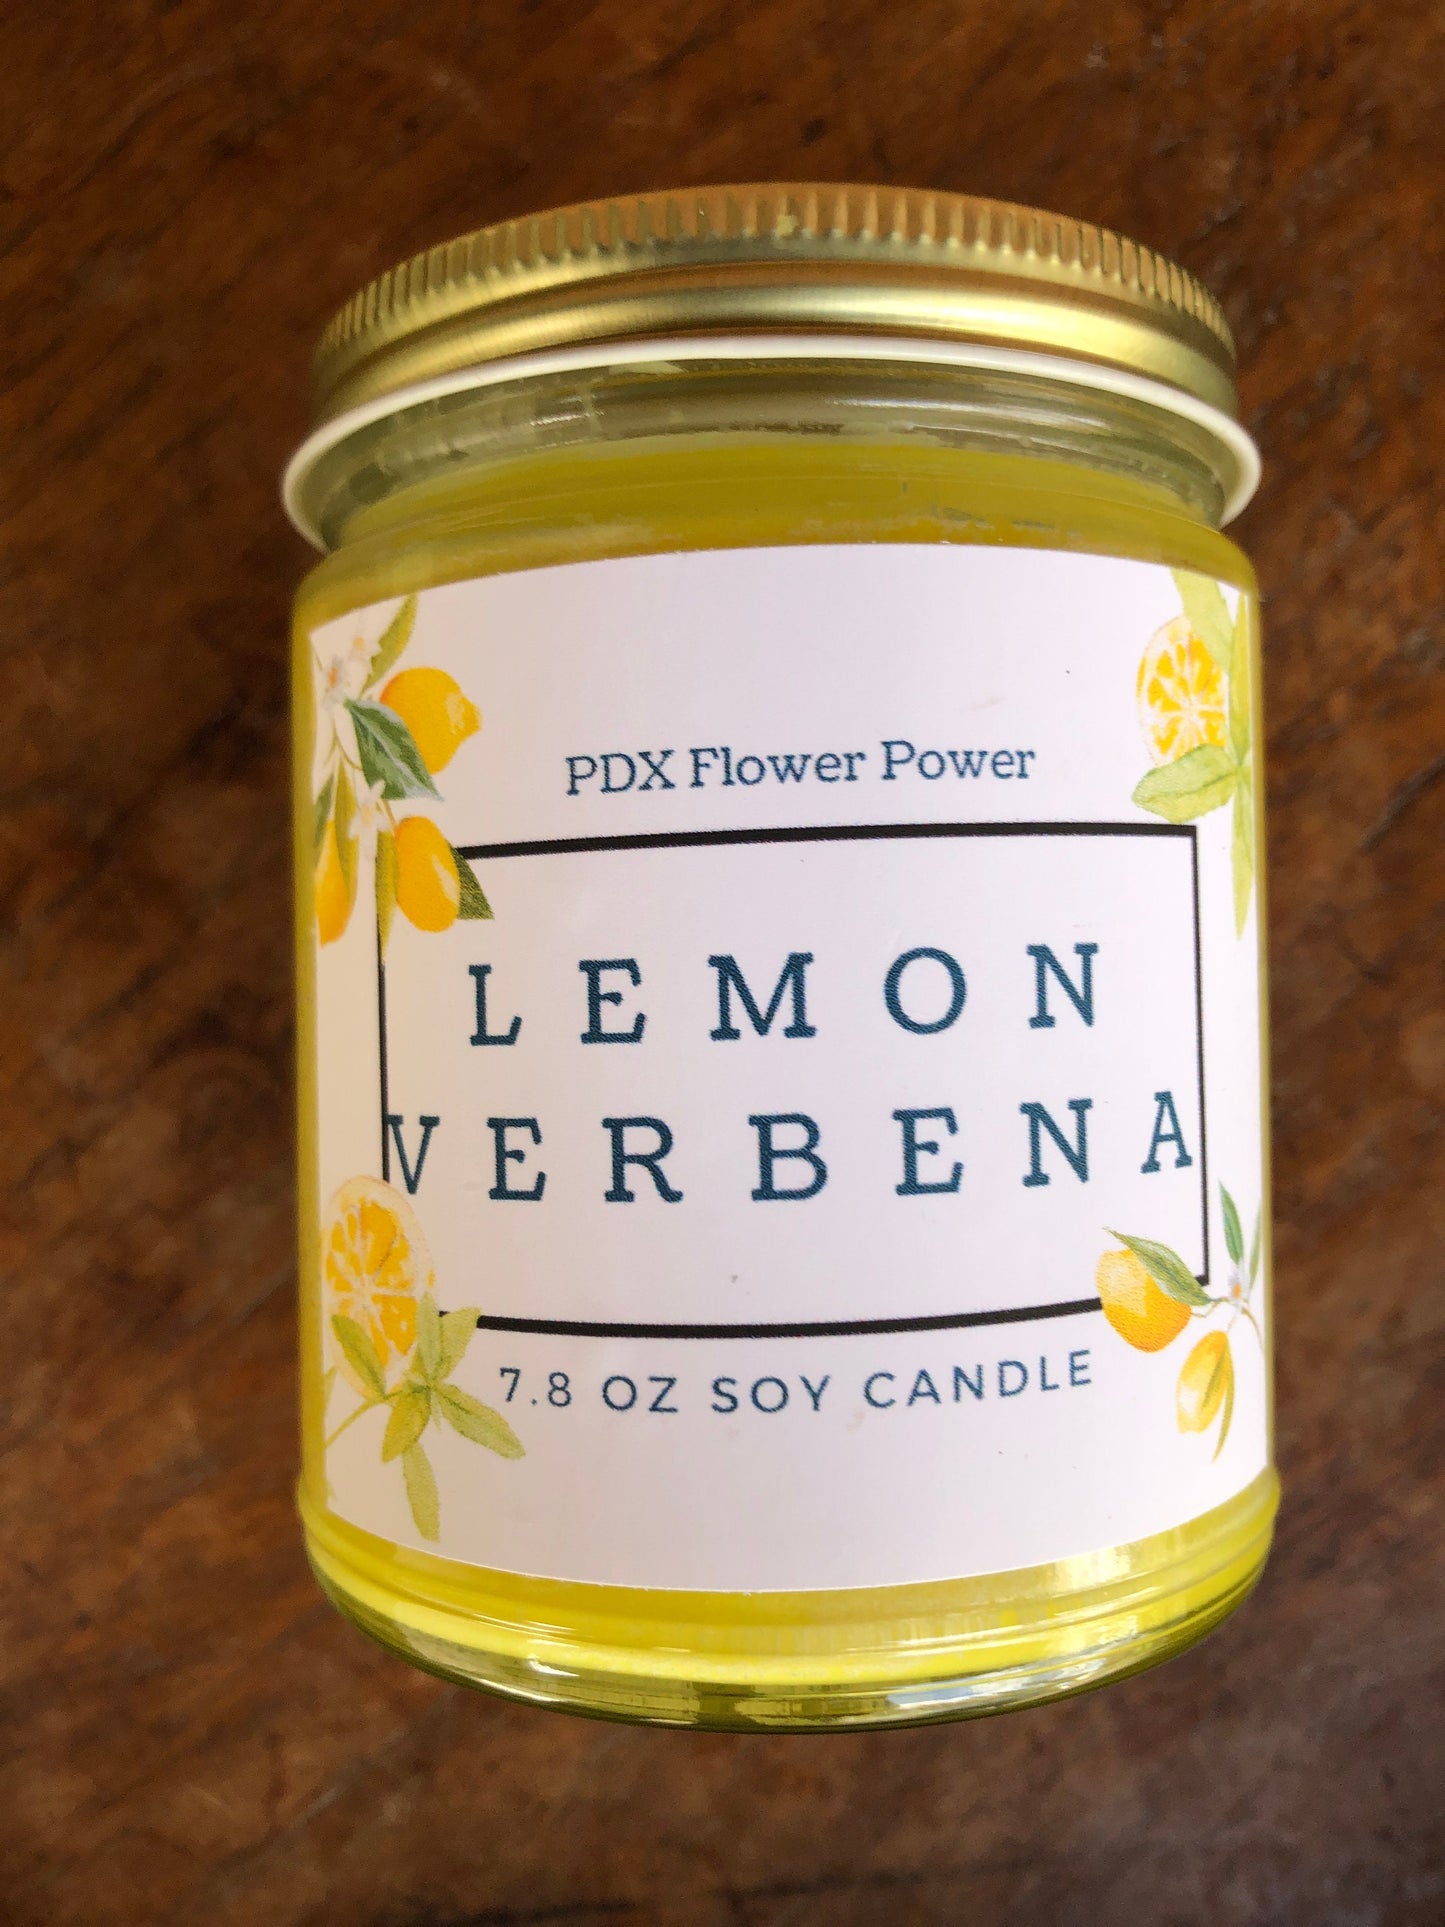 PDX Flower Power  " Lemon Verbena " handcrafted soy candle